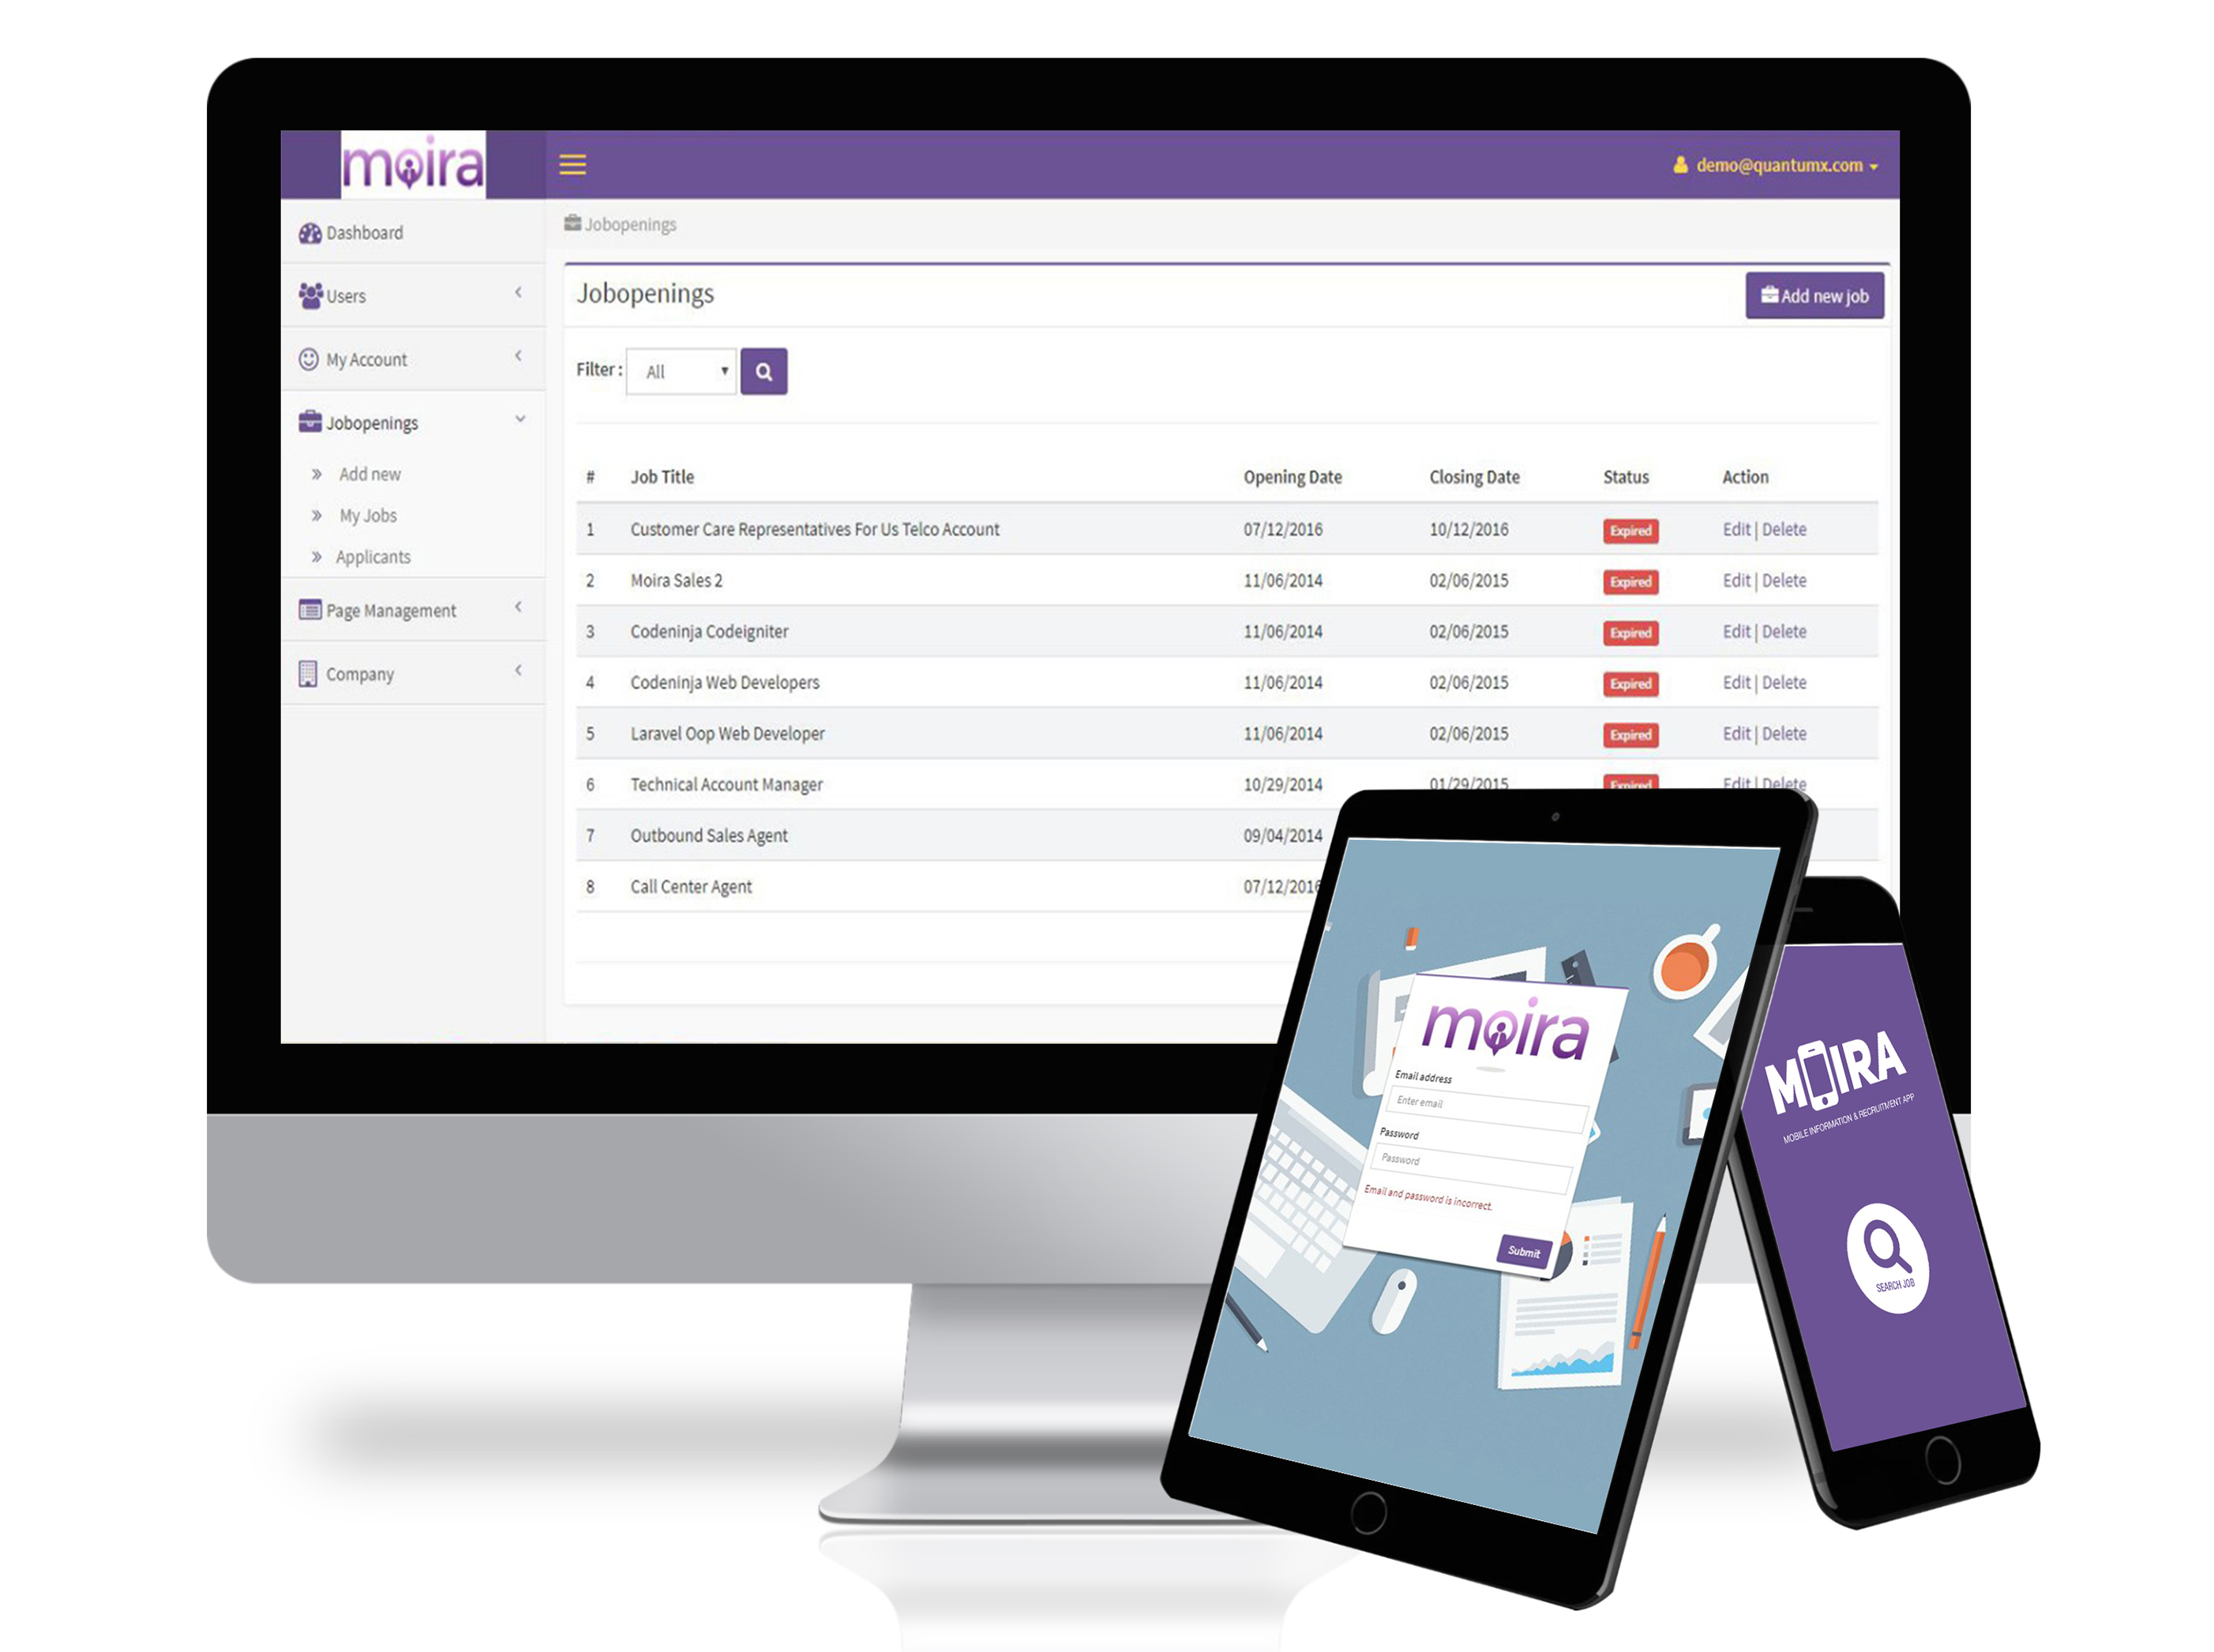 MOIRA is a recruitment app developed to help HR officer reach applicants through mobile phones.